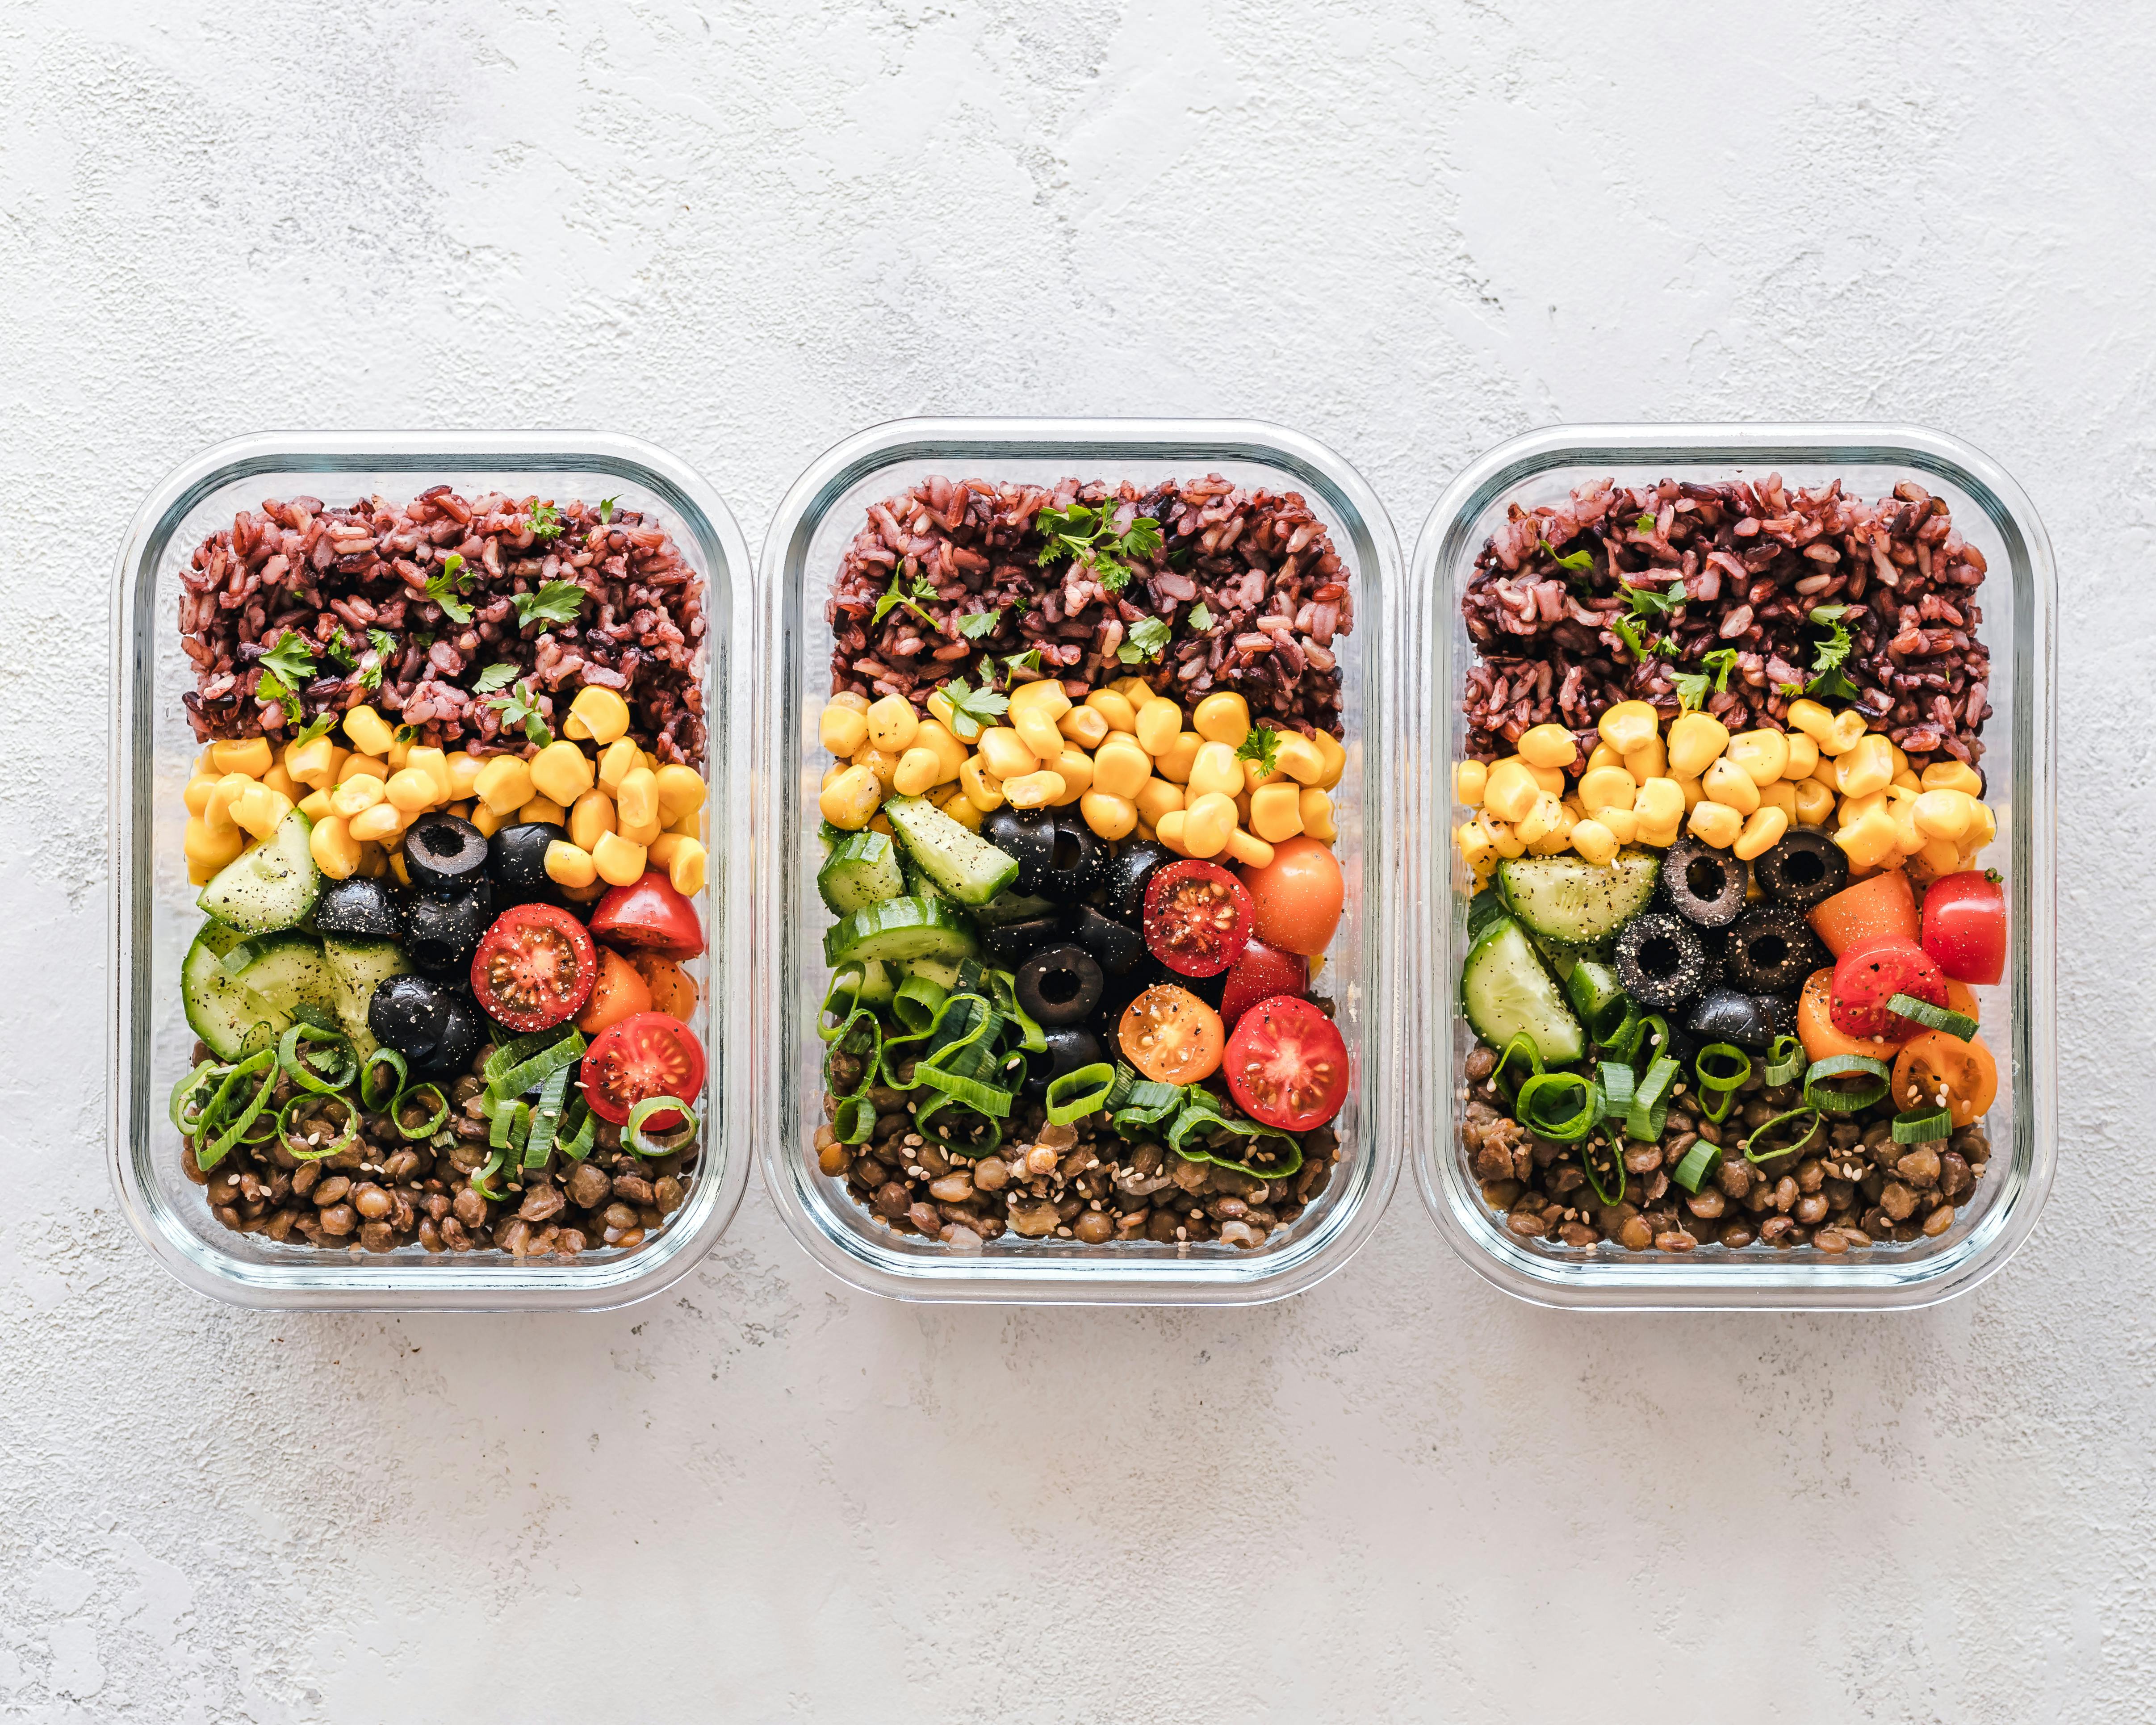 Three containers filled with food | Source: Pexels